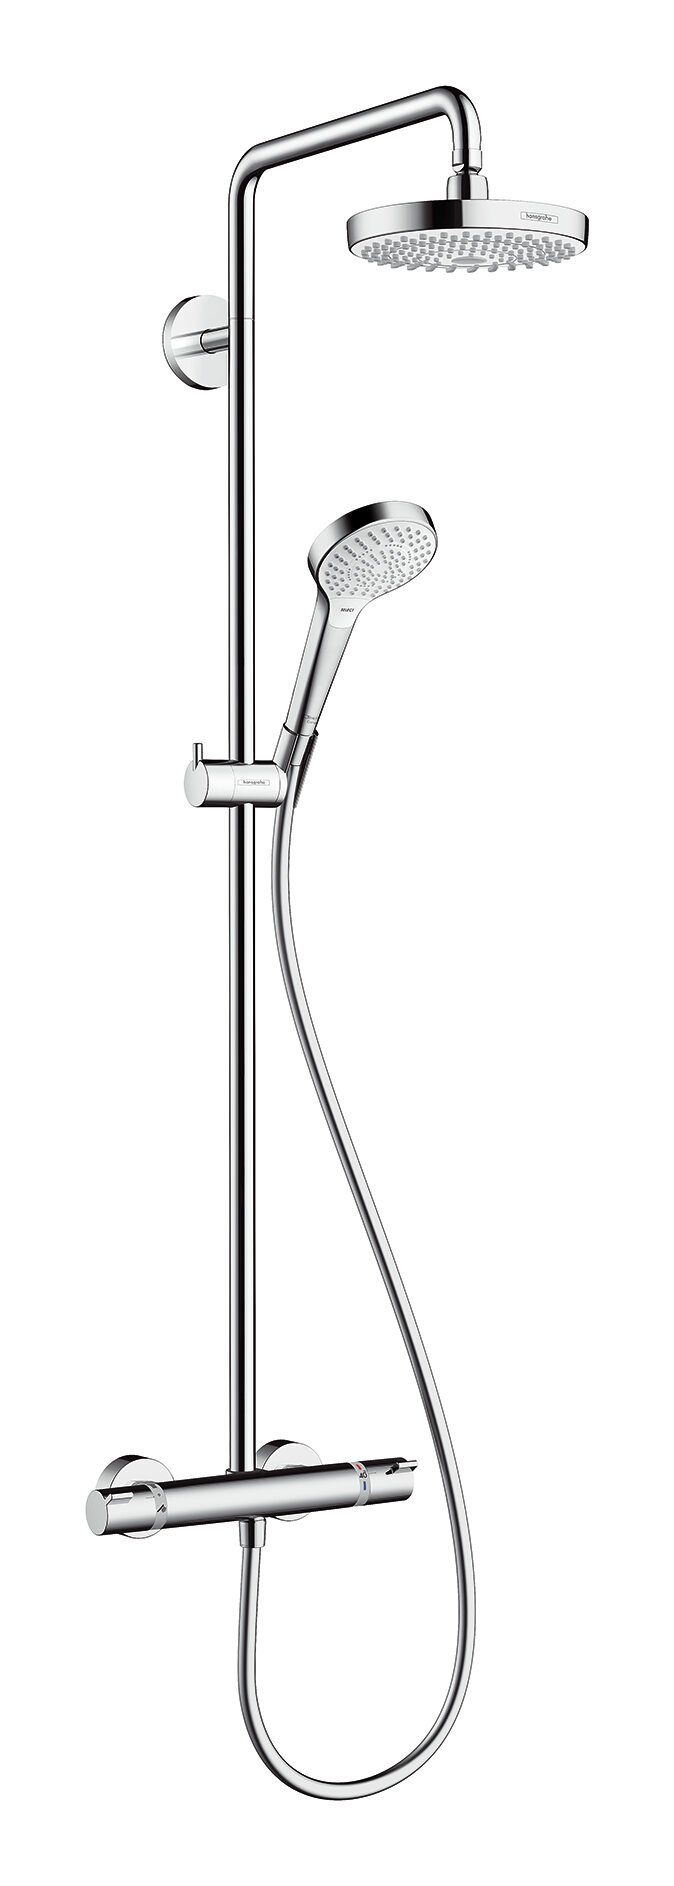 hansgrohe Duschsystem Croma Select S Showerpipe, Höhe 114.1 cm, 2 Strahlart(en), 180 2jet mit Thermostat Weiß / Chrom